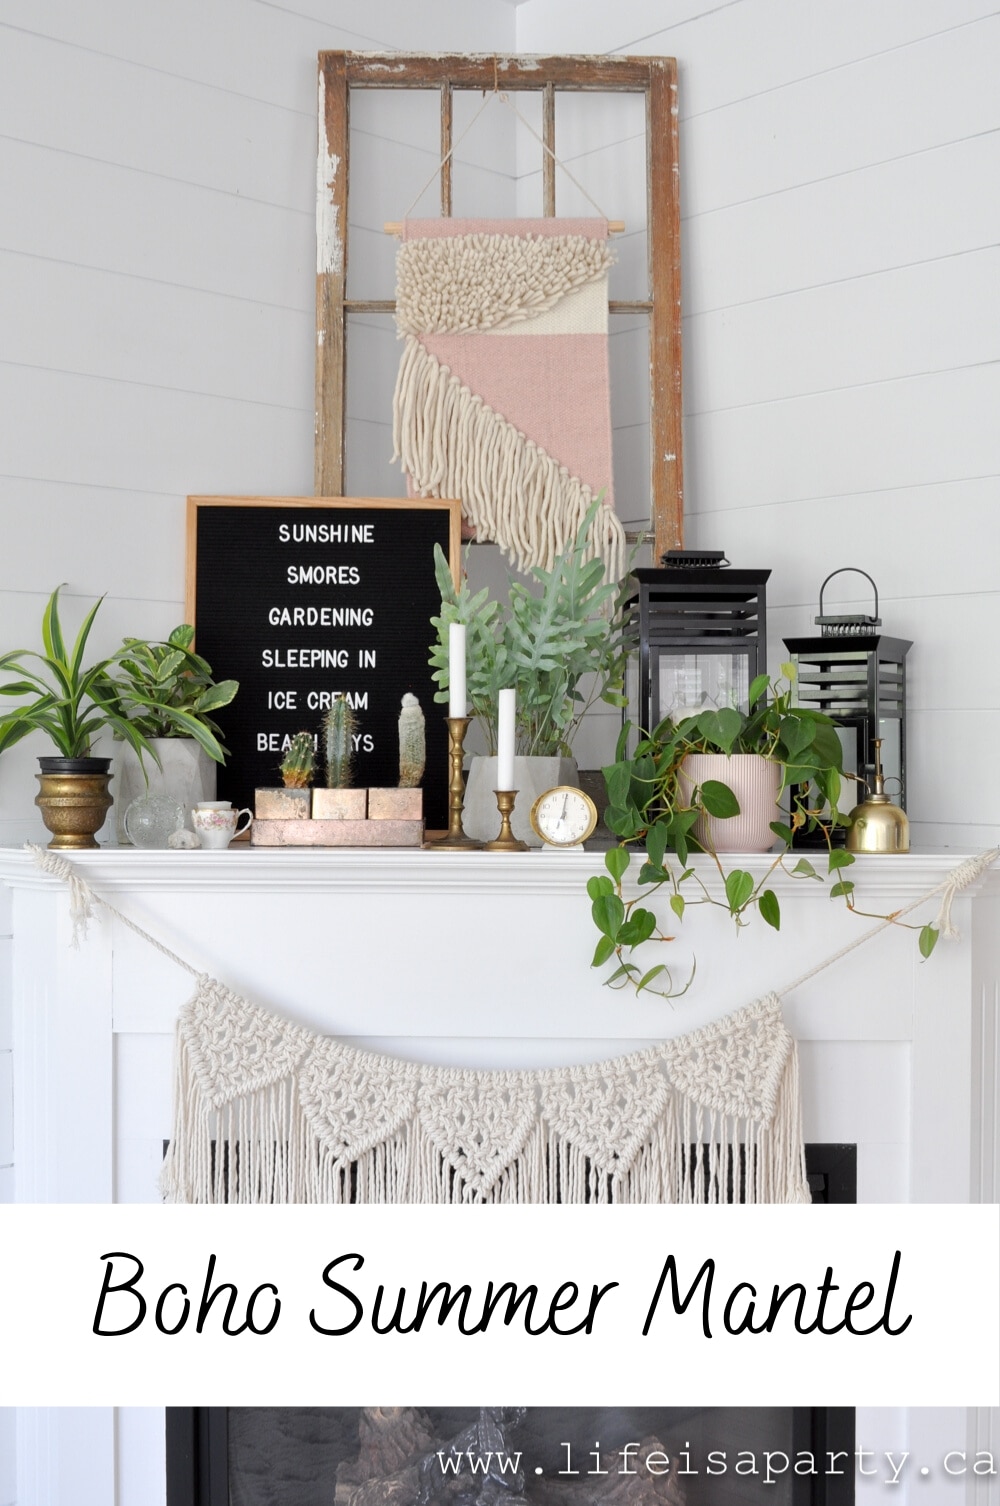 Boho Summer Mantel Decor: this relaxed summer fireplace mantel incorporates elements like brass, plants, and macrame for the perfect vibe.